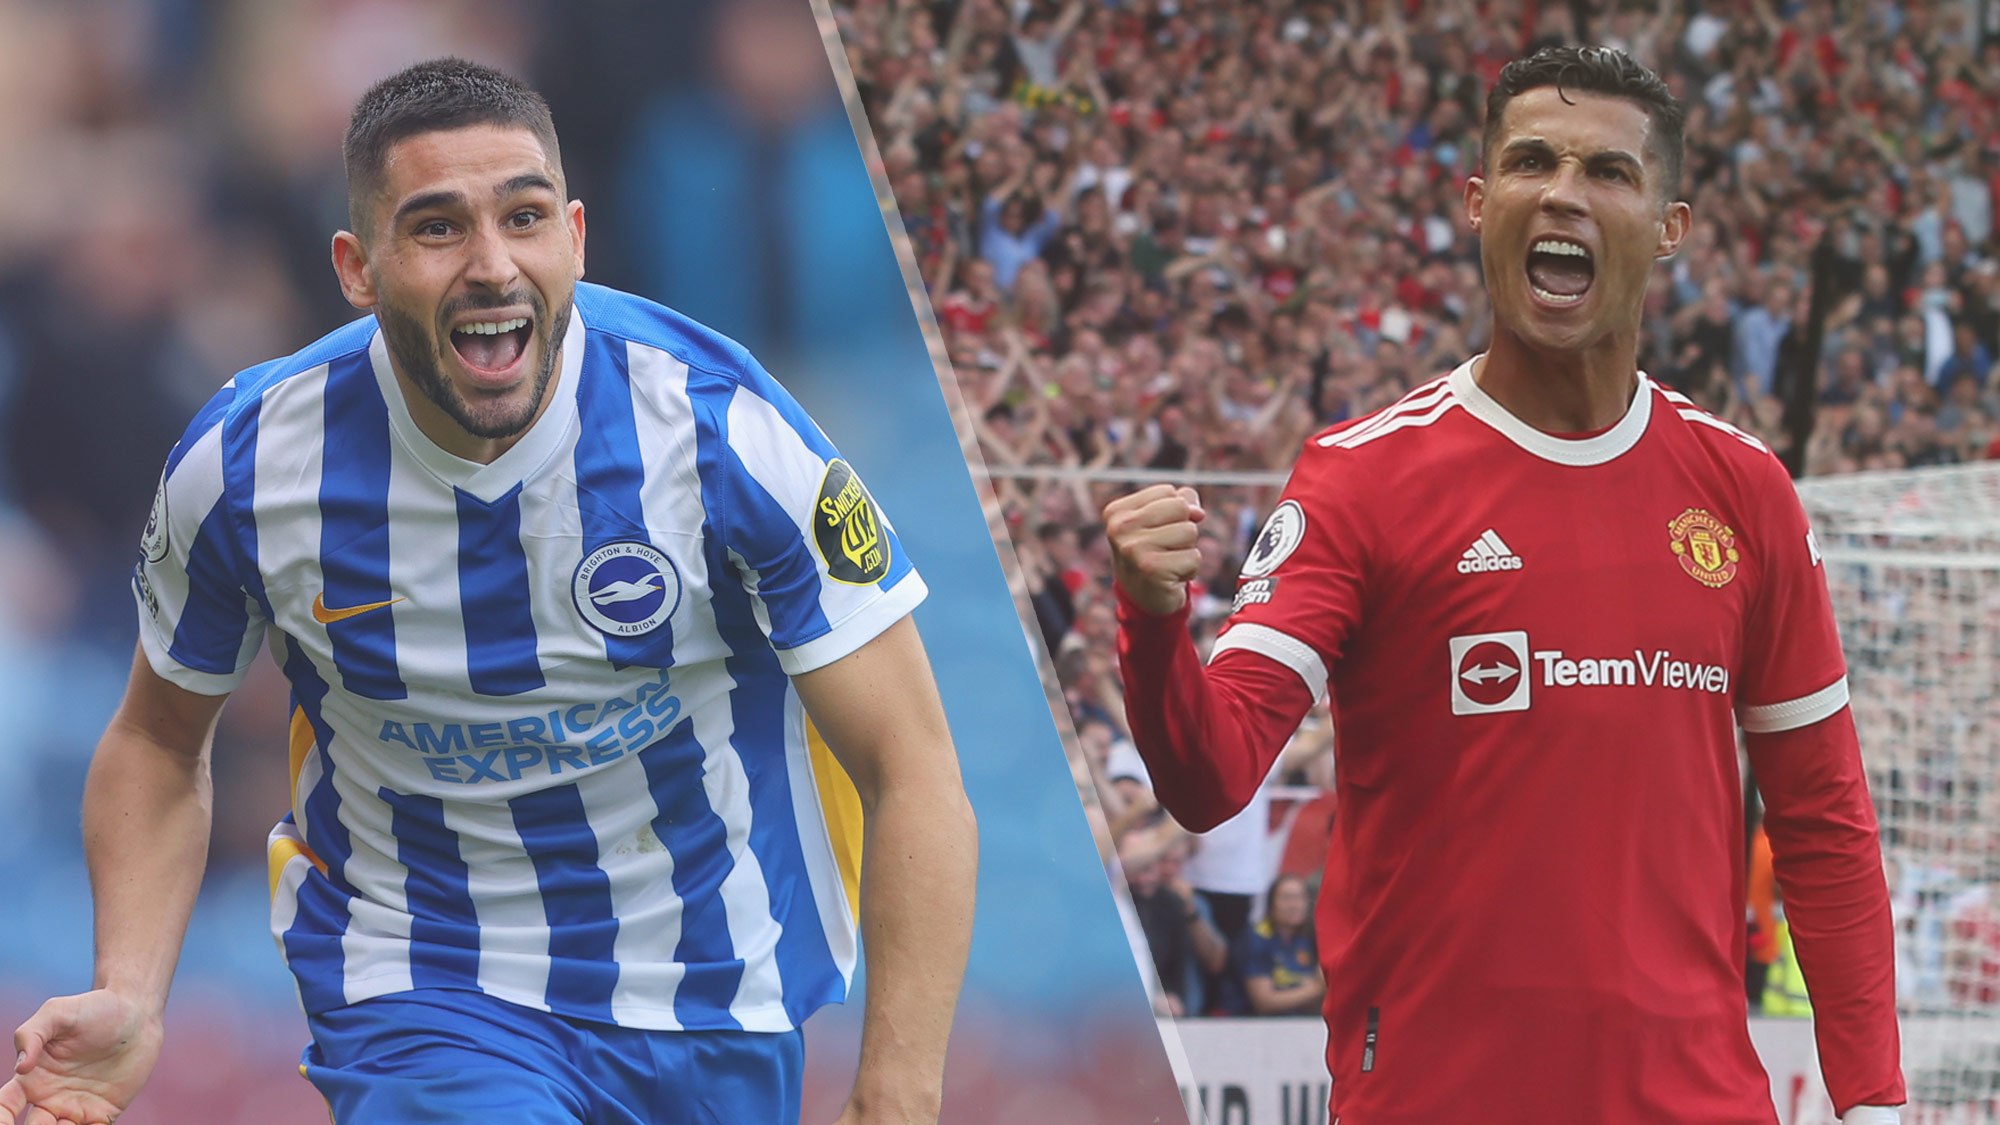 Brighton's Neil Moffay and Manchester United's Cristiano Ronaldo are both available to appear on the Brighton v Manchester United live stream.